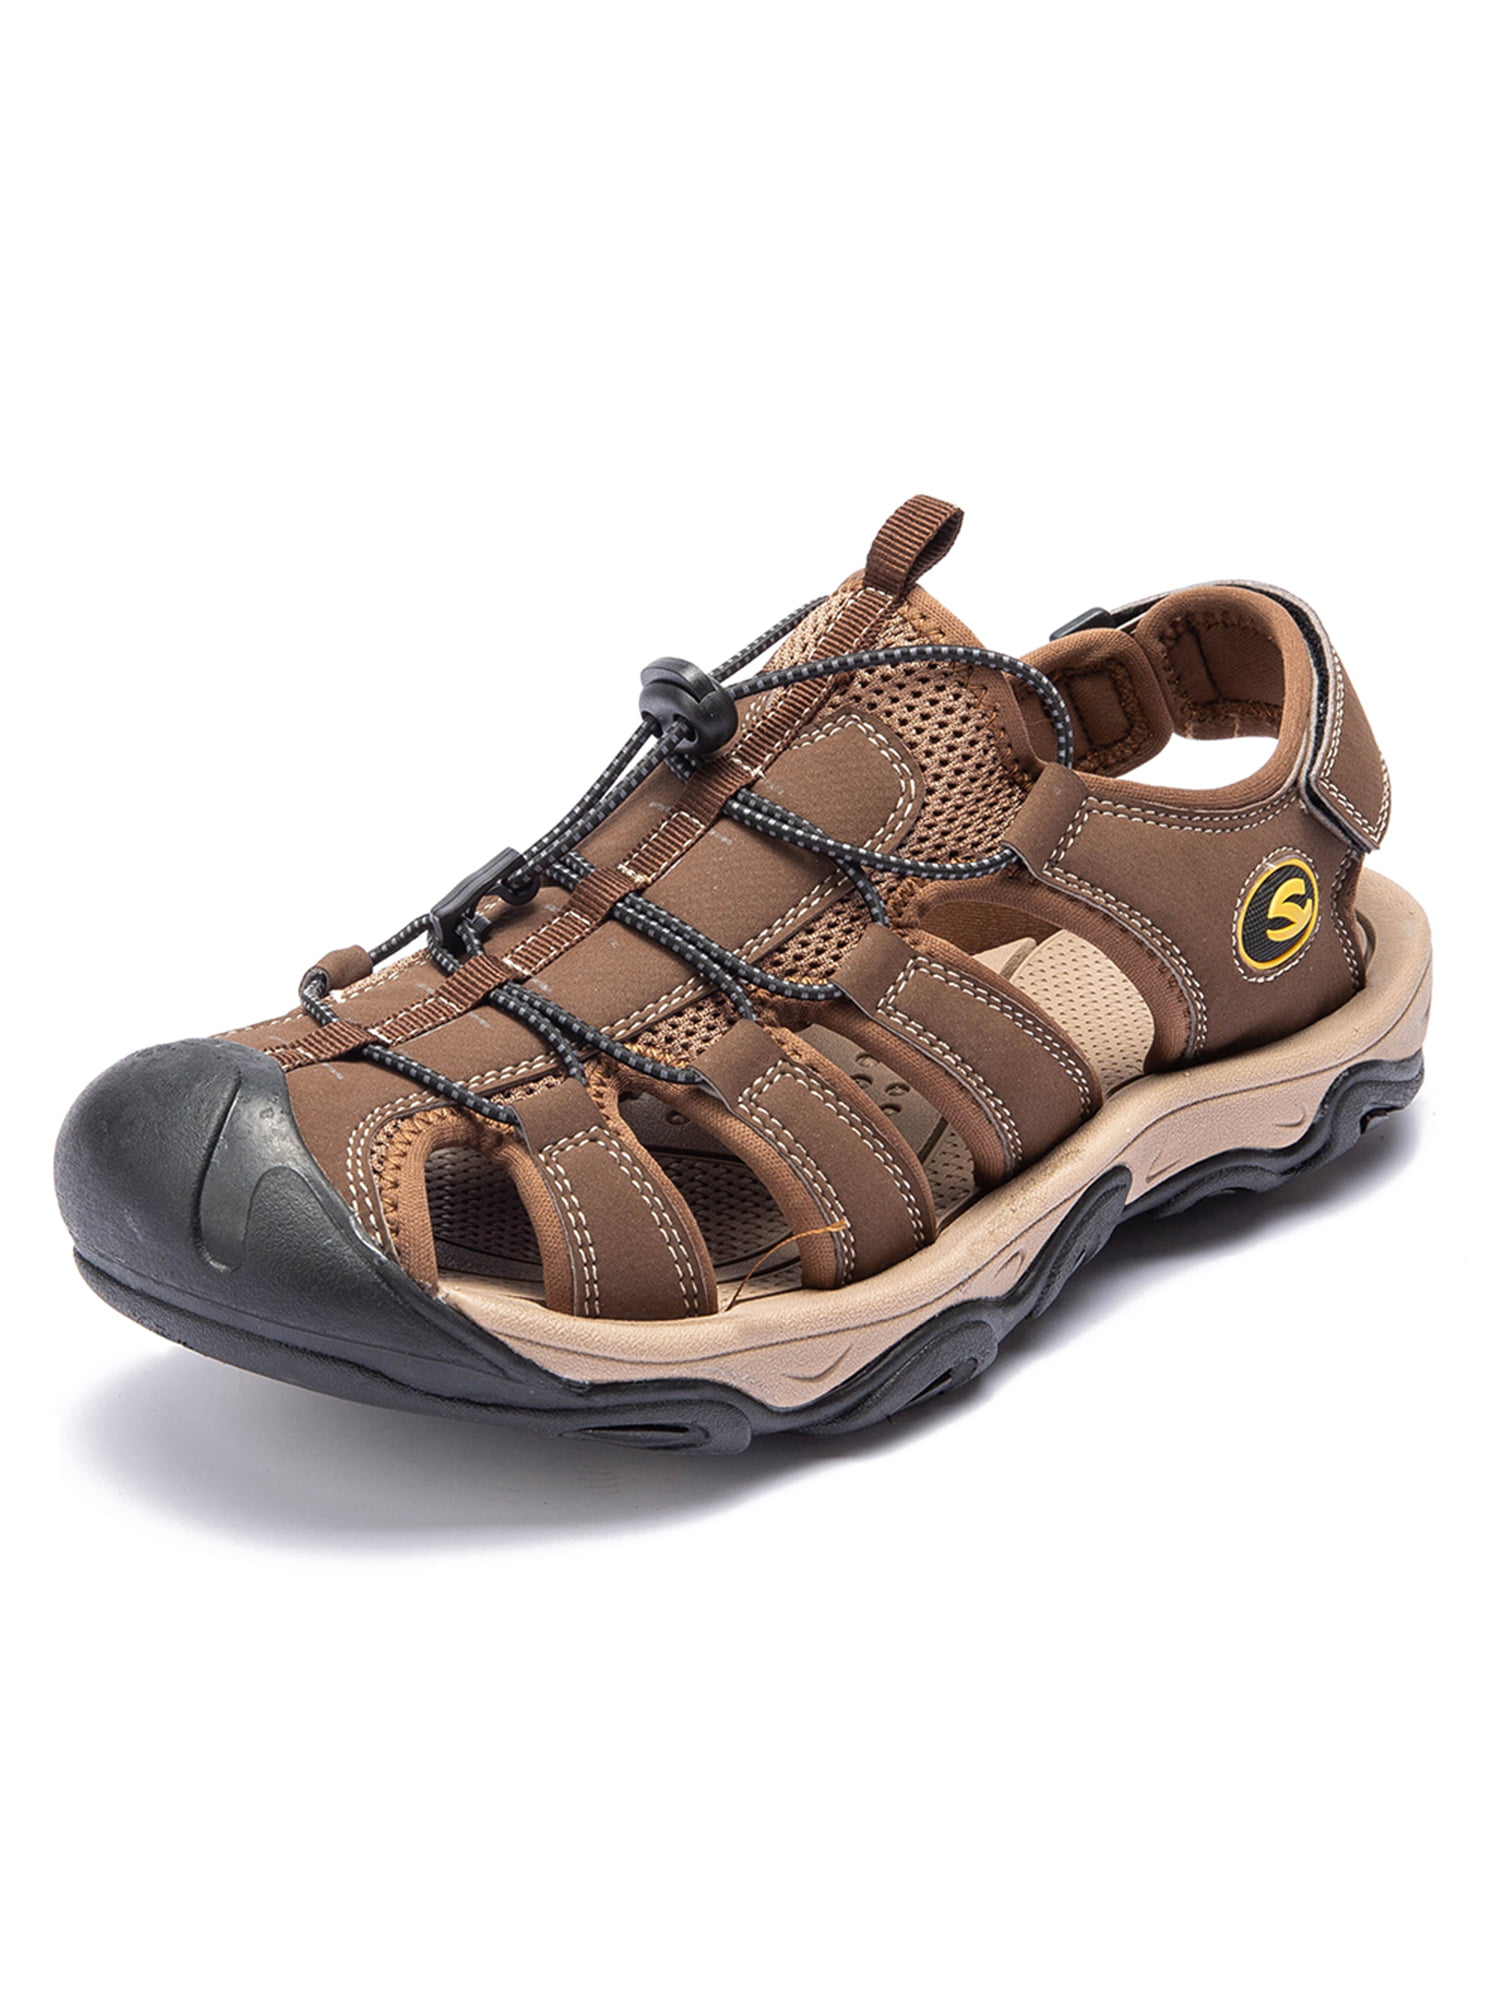 Details about   Sandals New Beach Shoes Casual Outdoor Sandals Breathable Soft Sole Shoes 